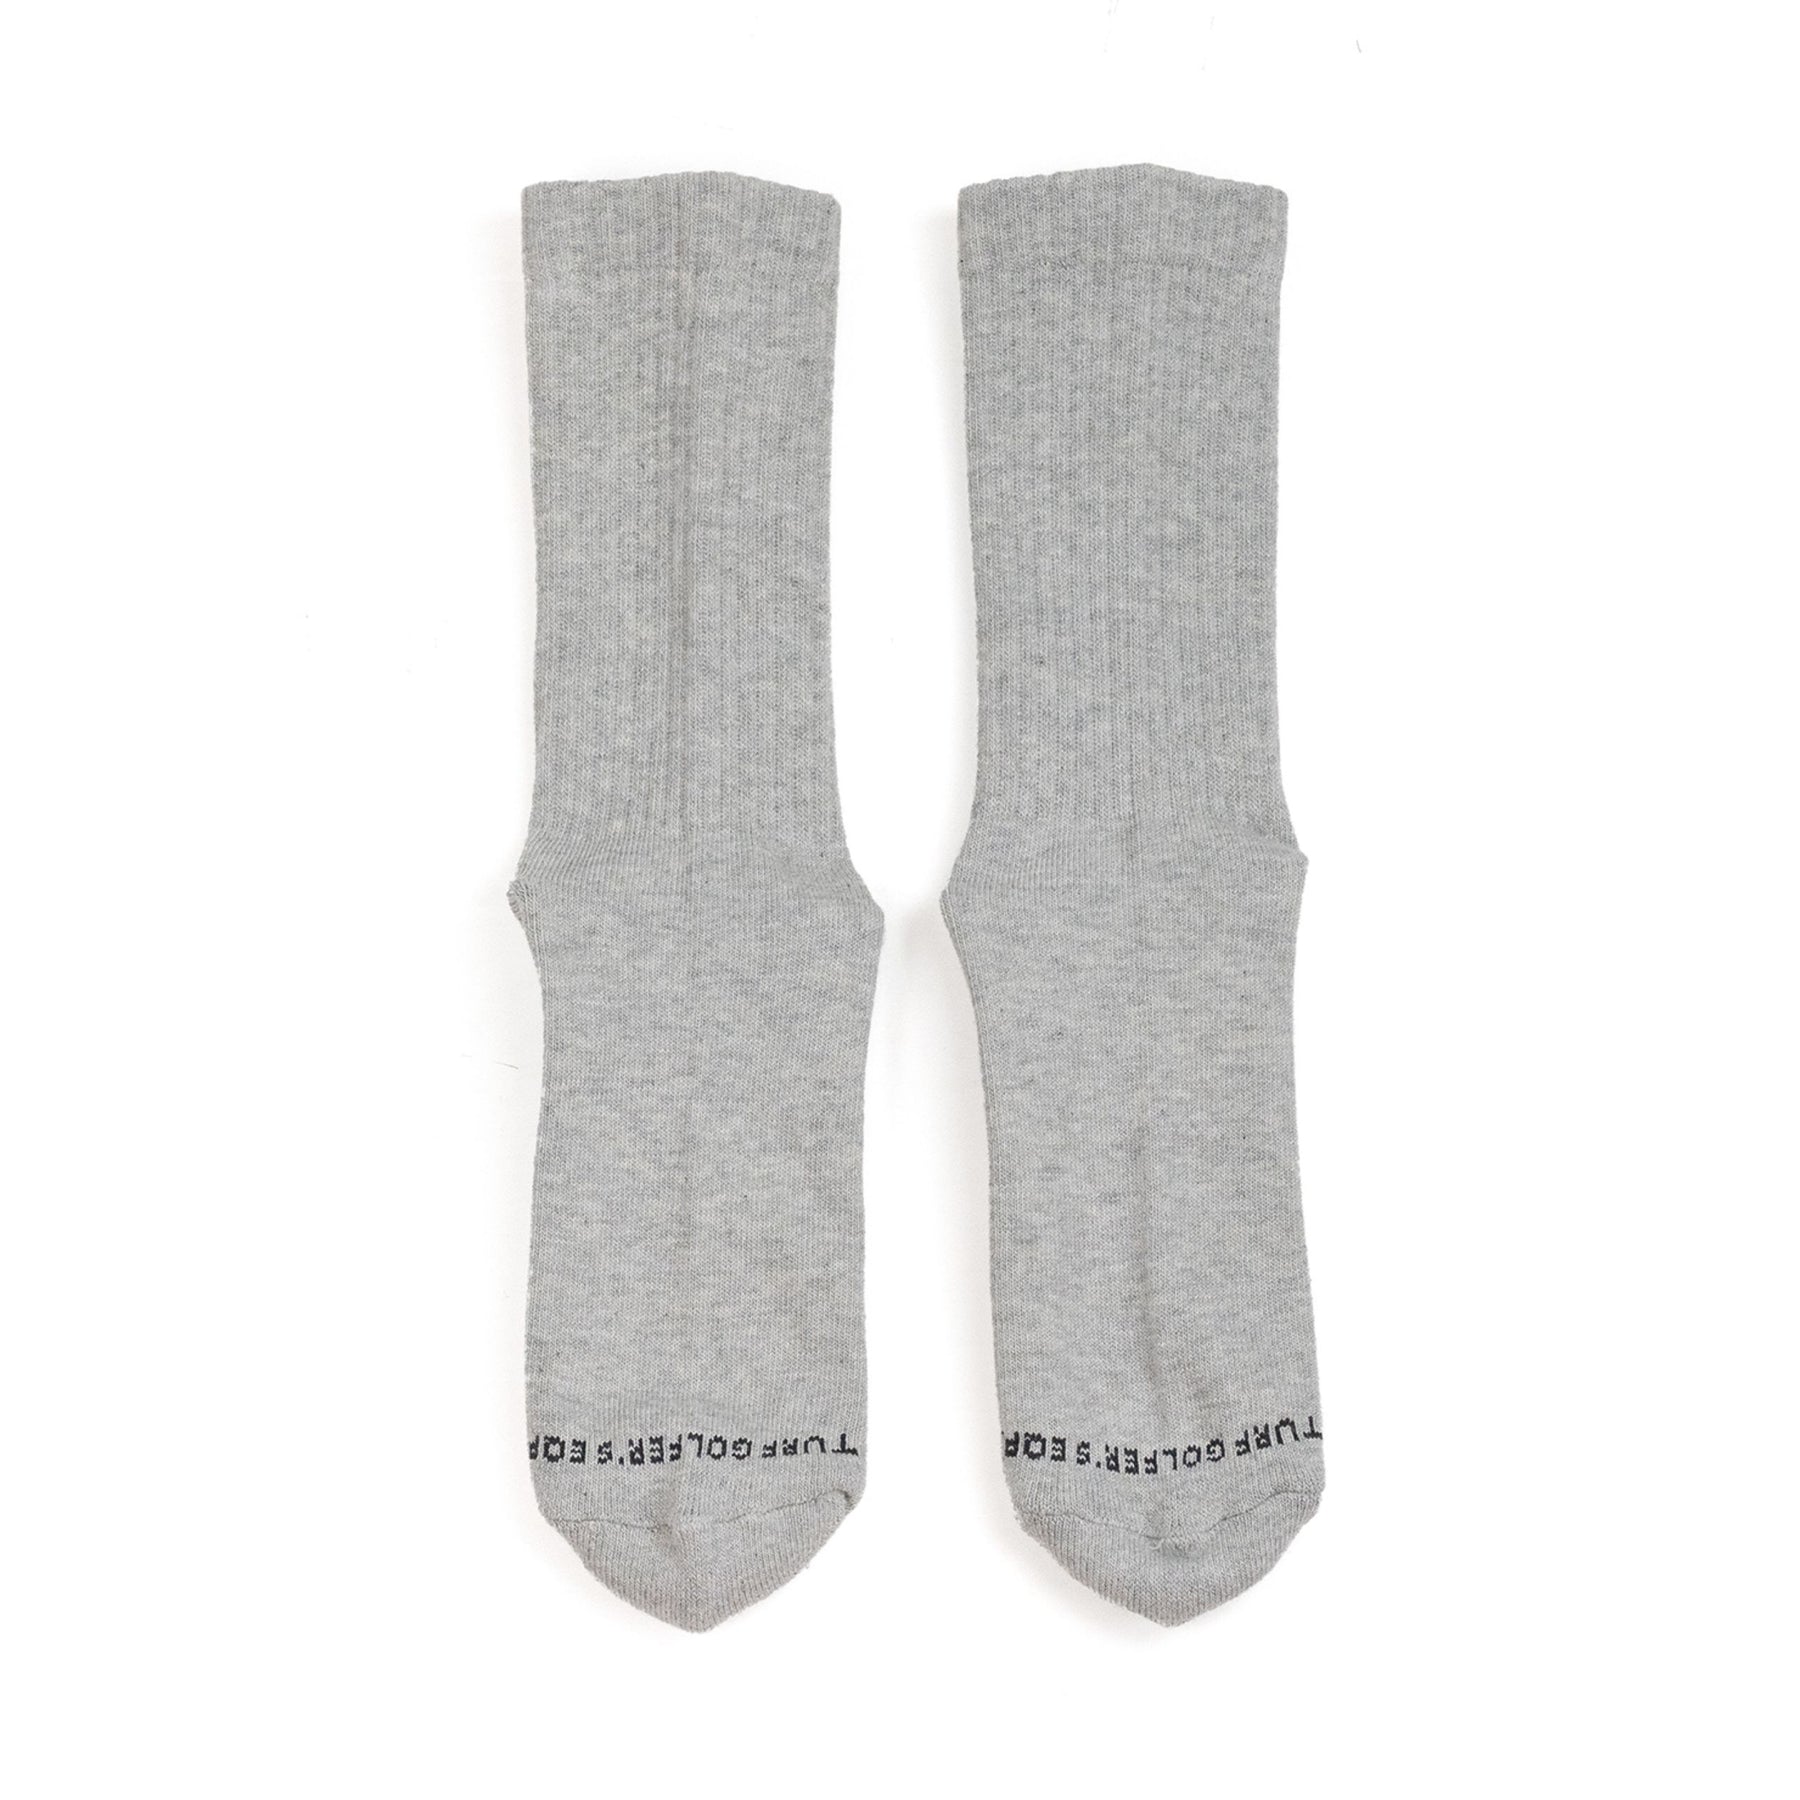 TURF EMBROIDERY MIDDLE SOCKS｜TURF GOLFER'S EQP.